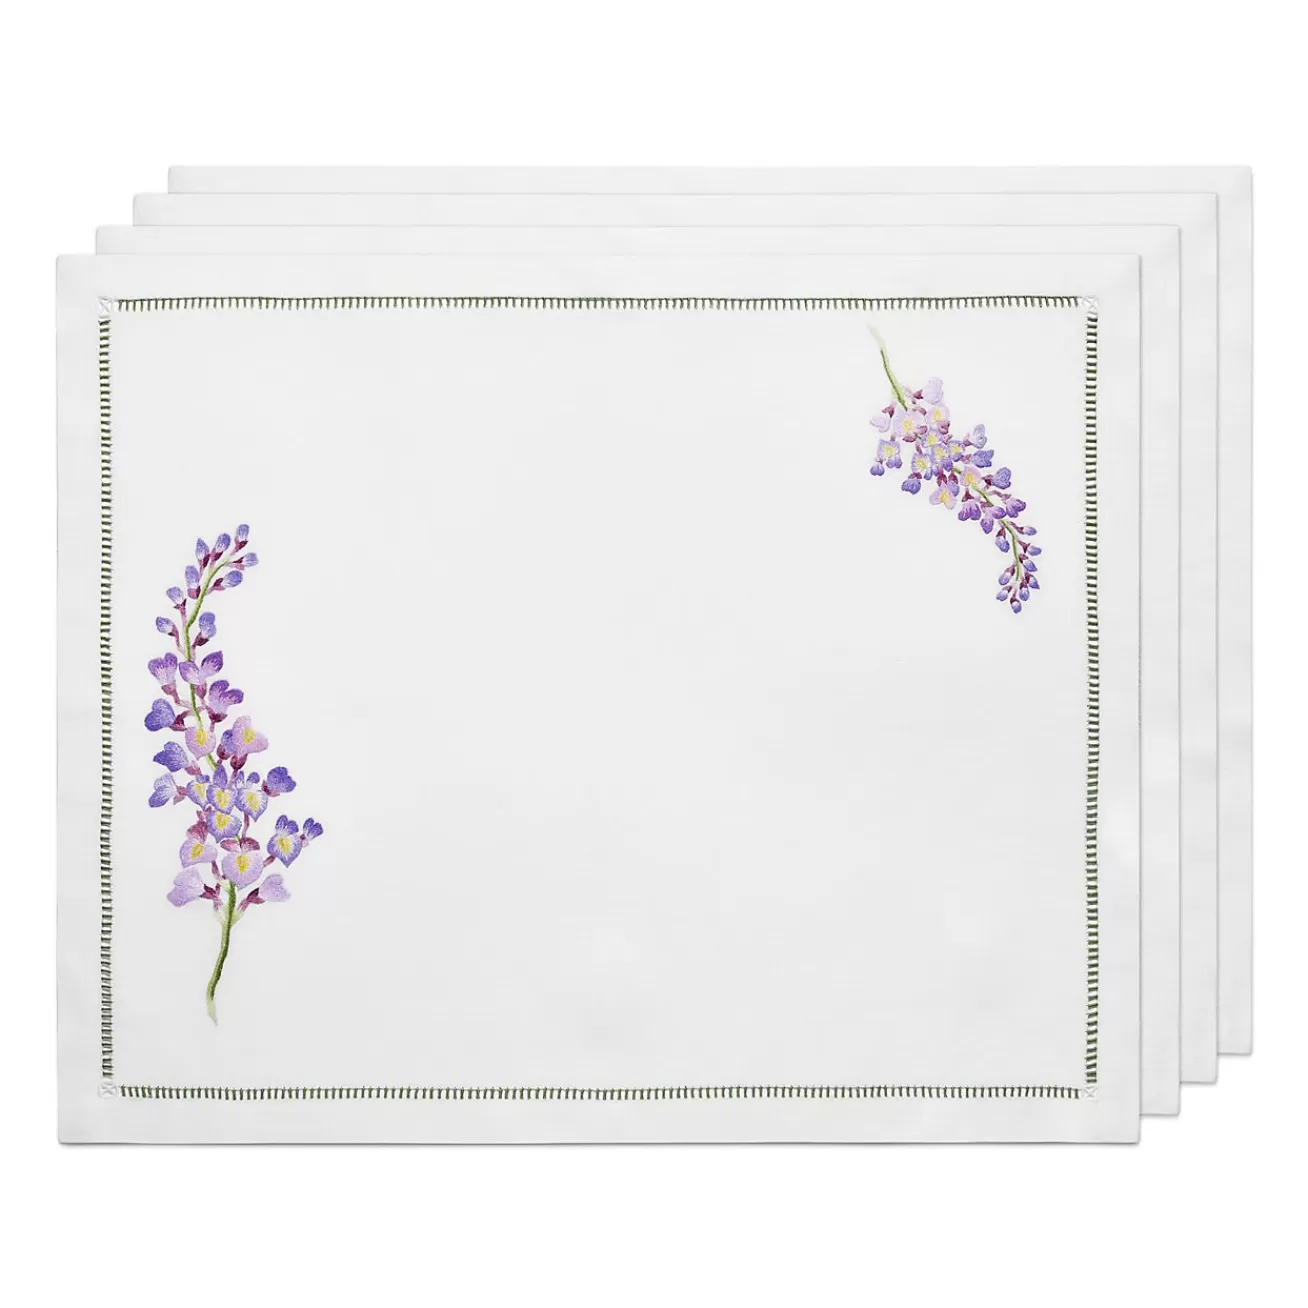 Tiffany & Co. Tiffany Wisteria Placemats in Linen, Set of Four | ^ Table Linens